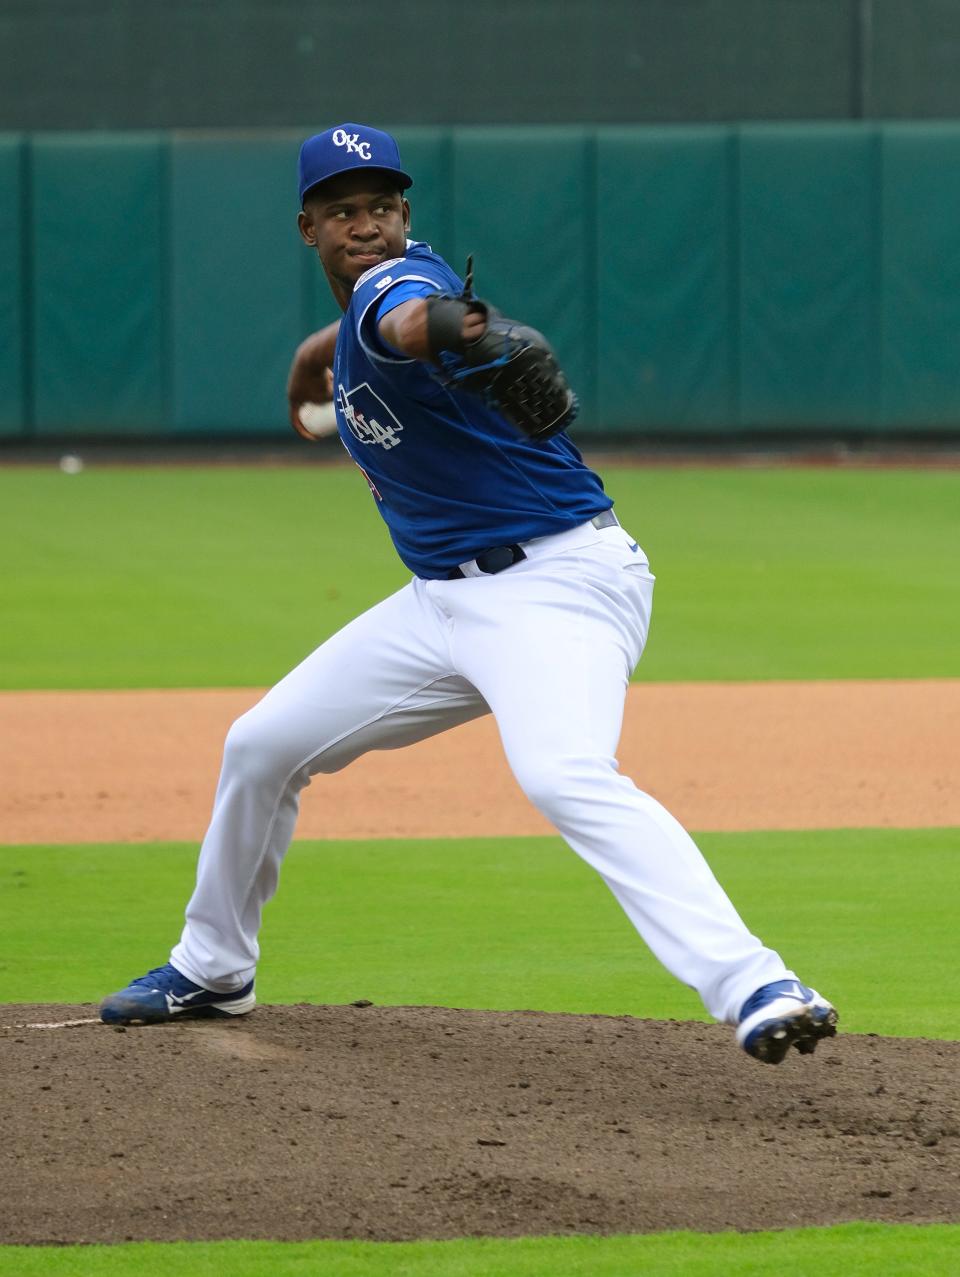 Yefry Ramirez pitches during practice at the media day for the OKC Dodgers at the Chickasaw Bricktown Ballpark, Monday, April 4, 2022.